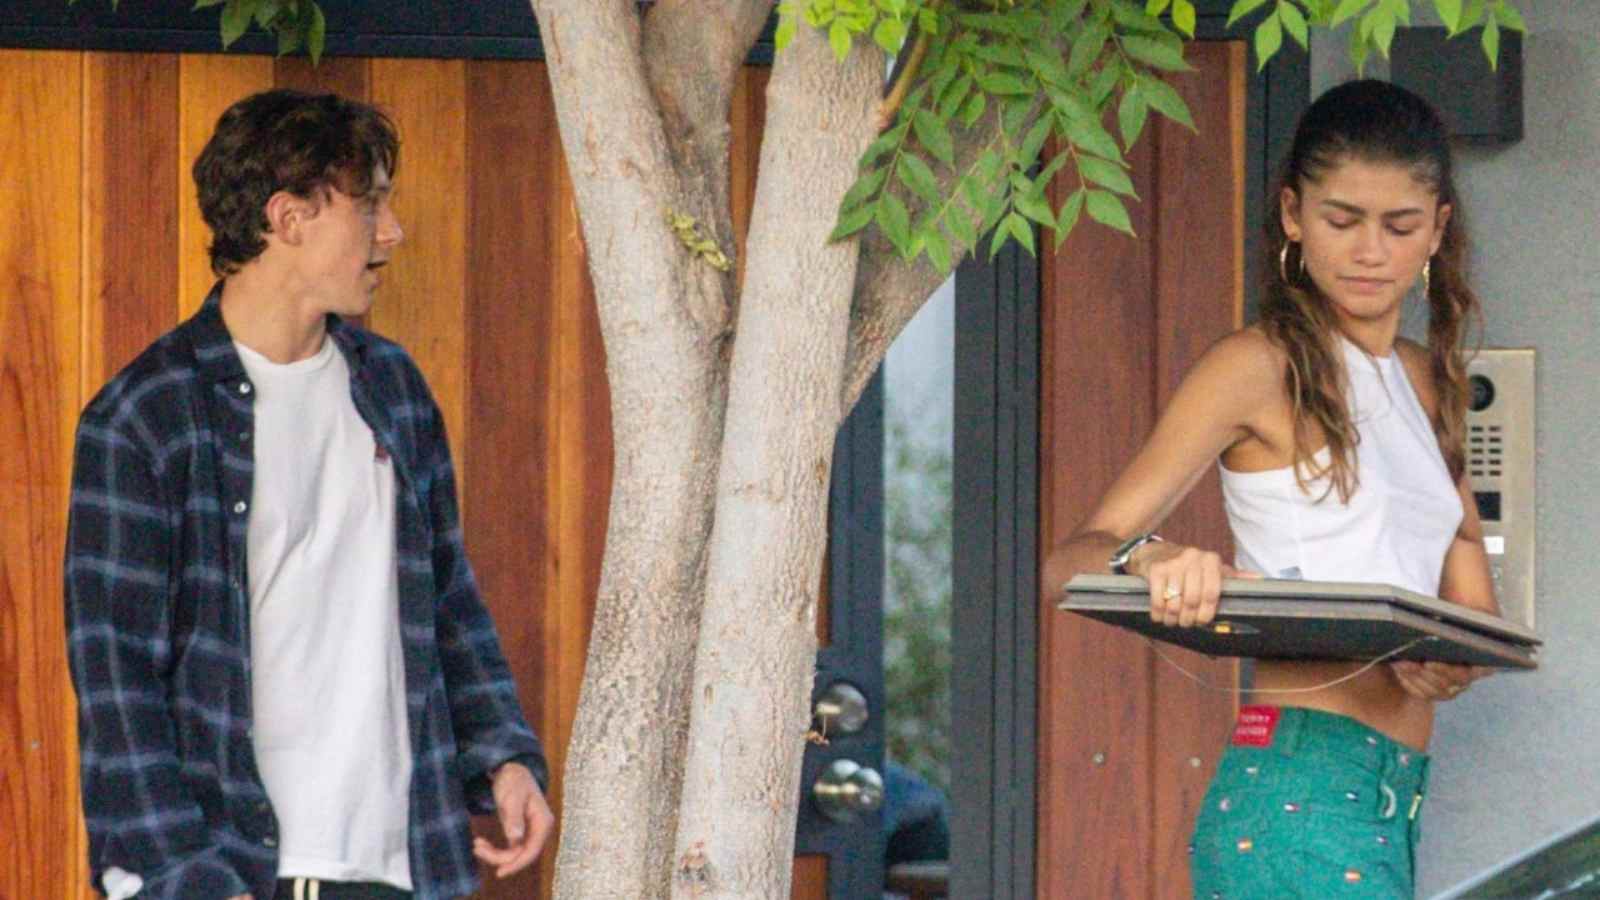 Tom and Zendaya as captured by the media at latter's home 